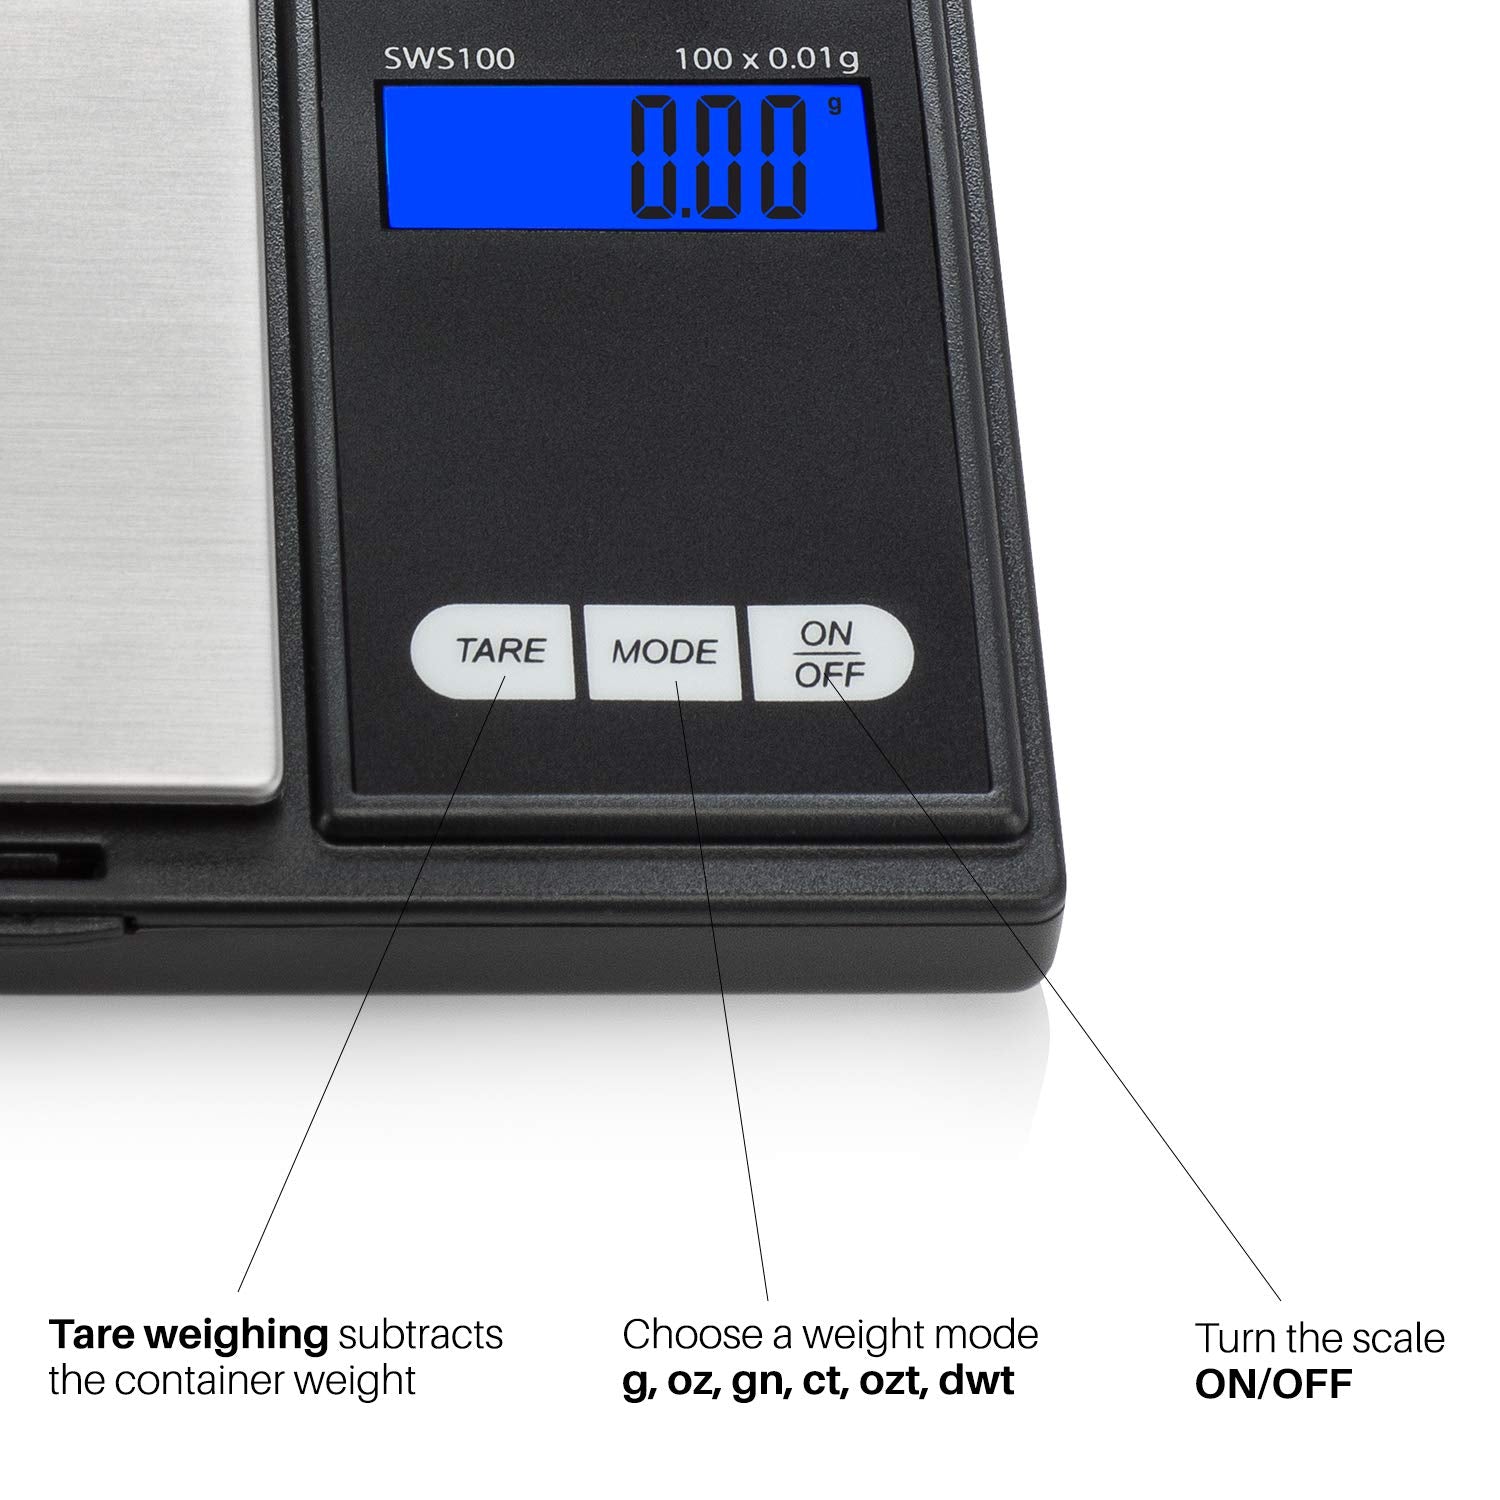 Amazingforless Pocket Sized Gram Scale Digital Portable Herb and Spice Cooking Food Kitchen Diet Scale Jewelry Weight Scale - image 5 of 5